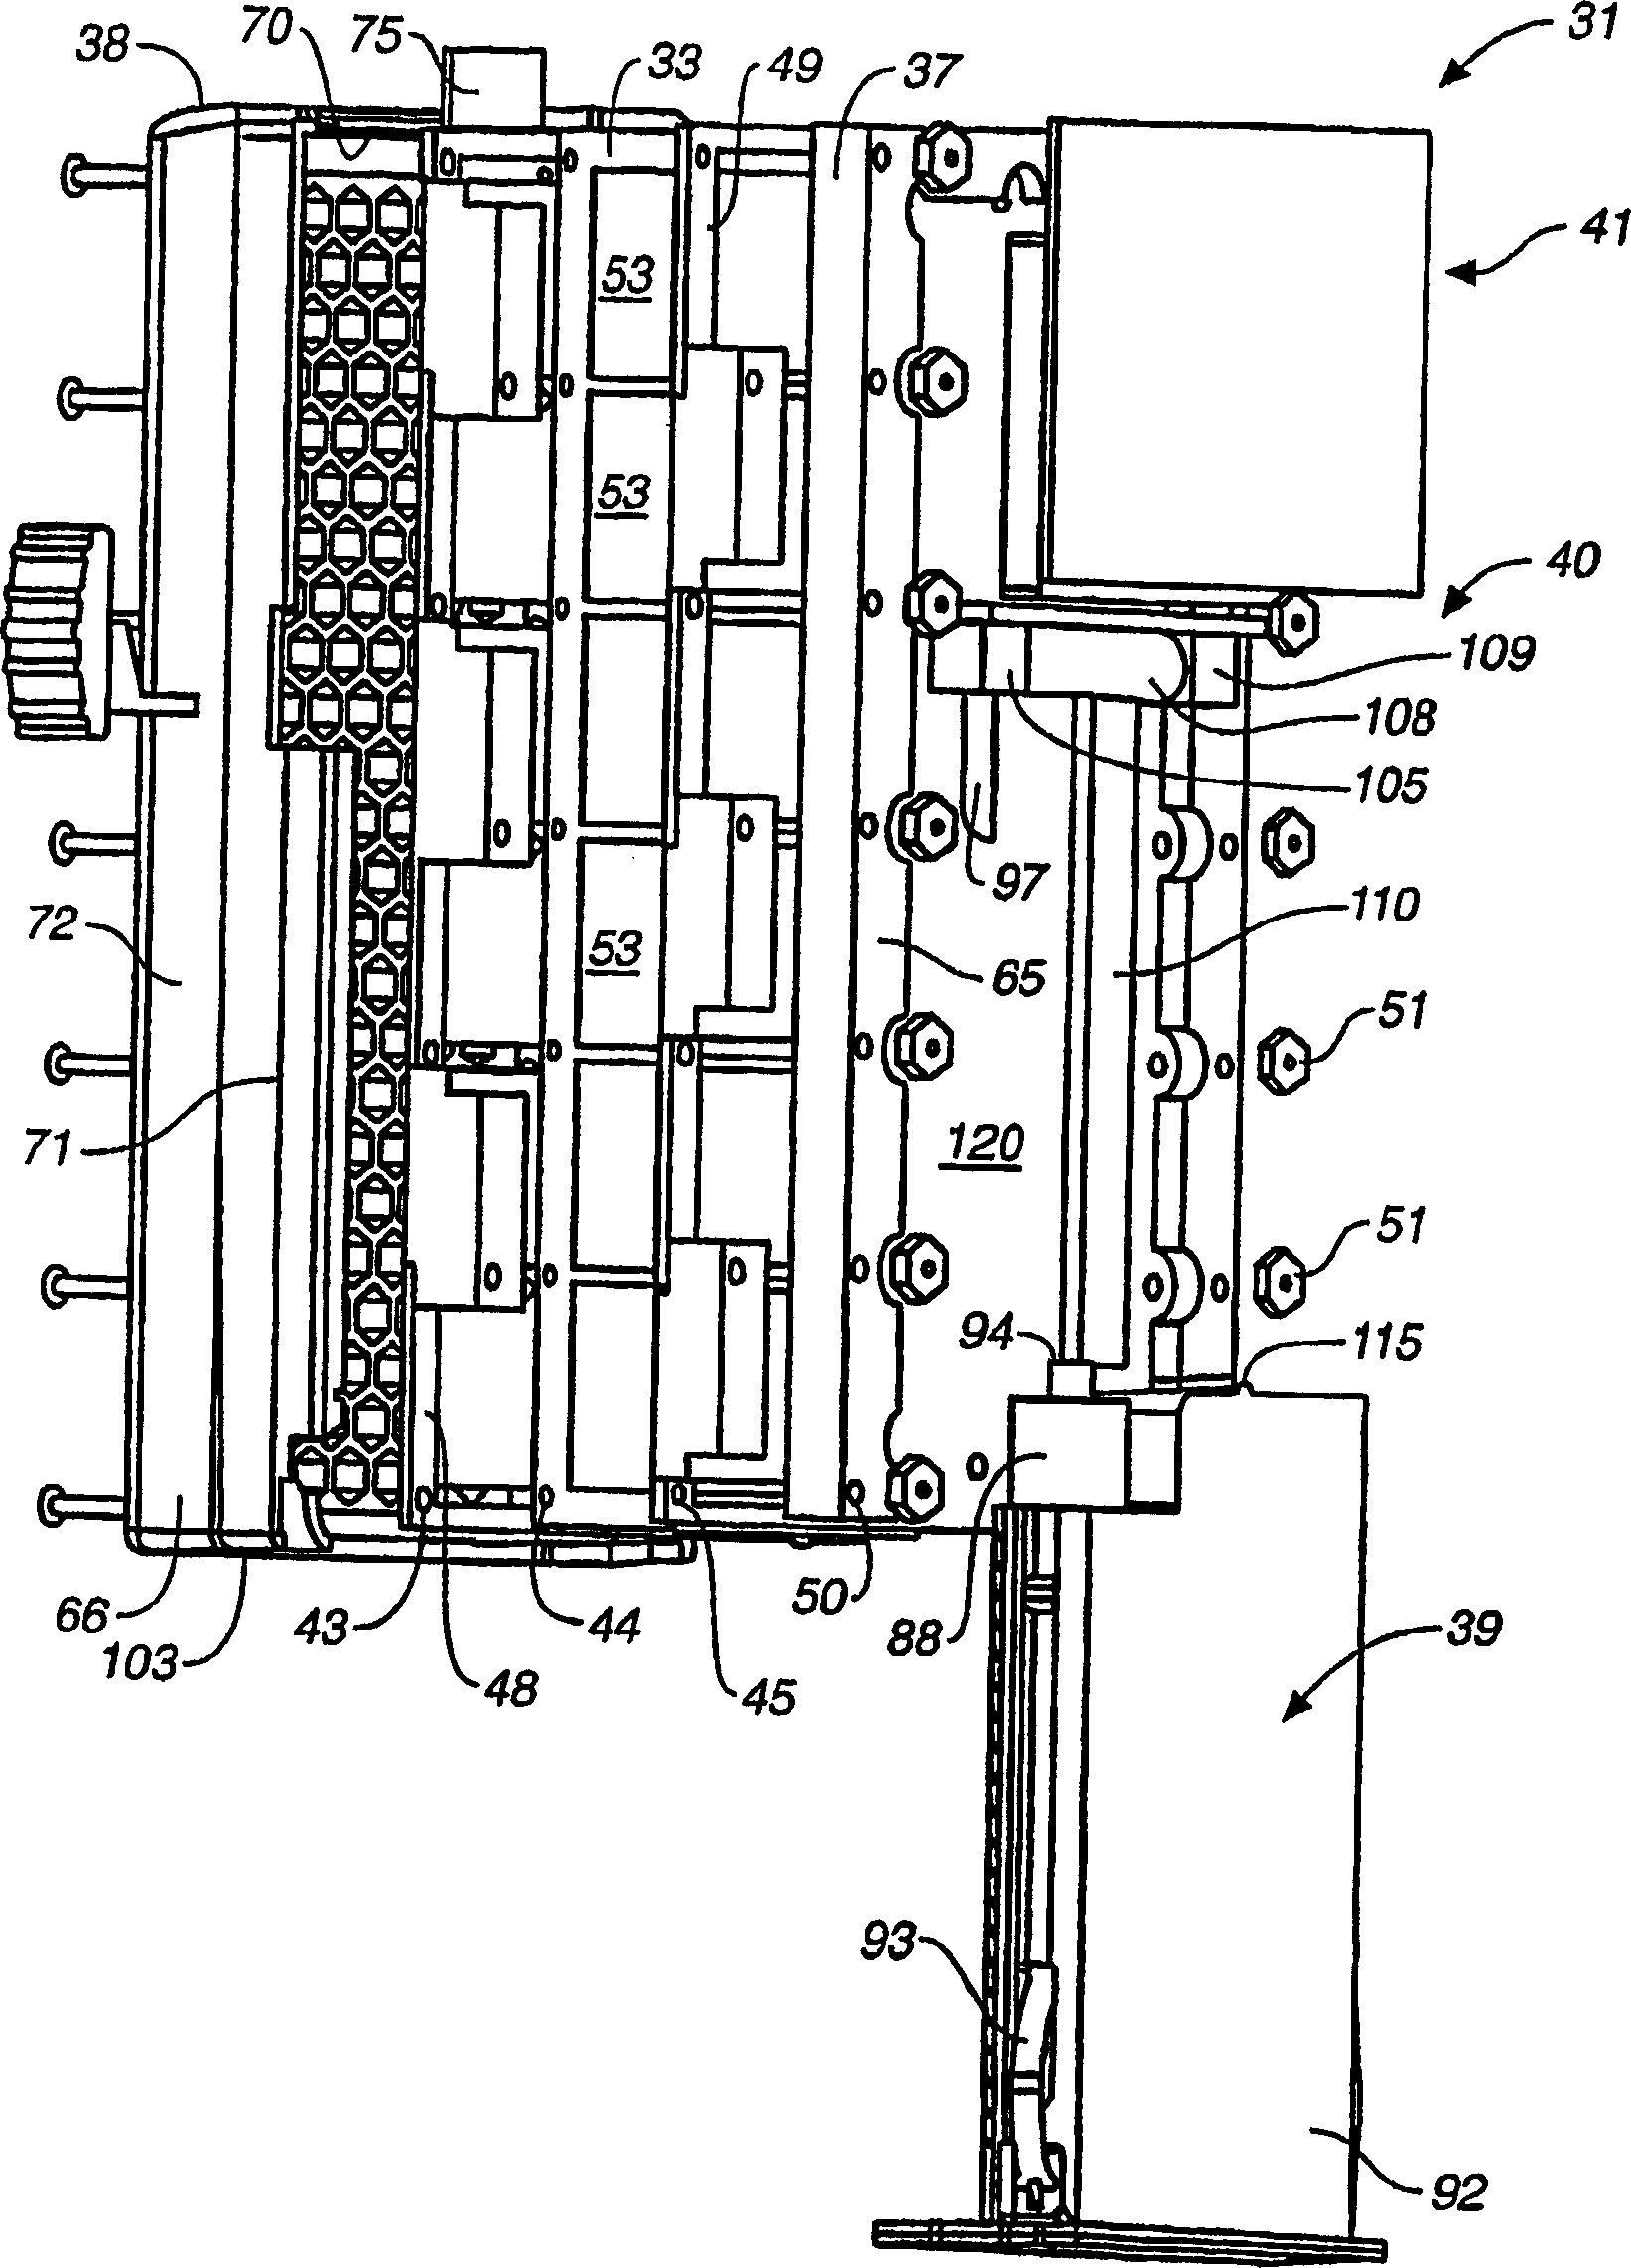 Fuel cell cartridge for portable electronic device